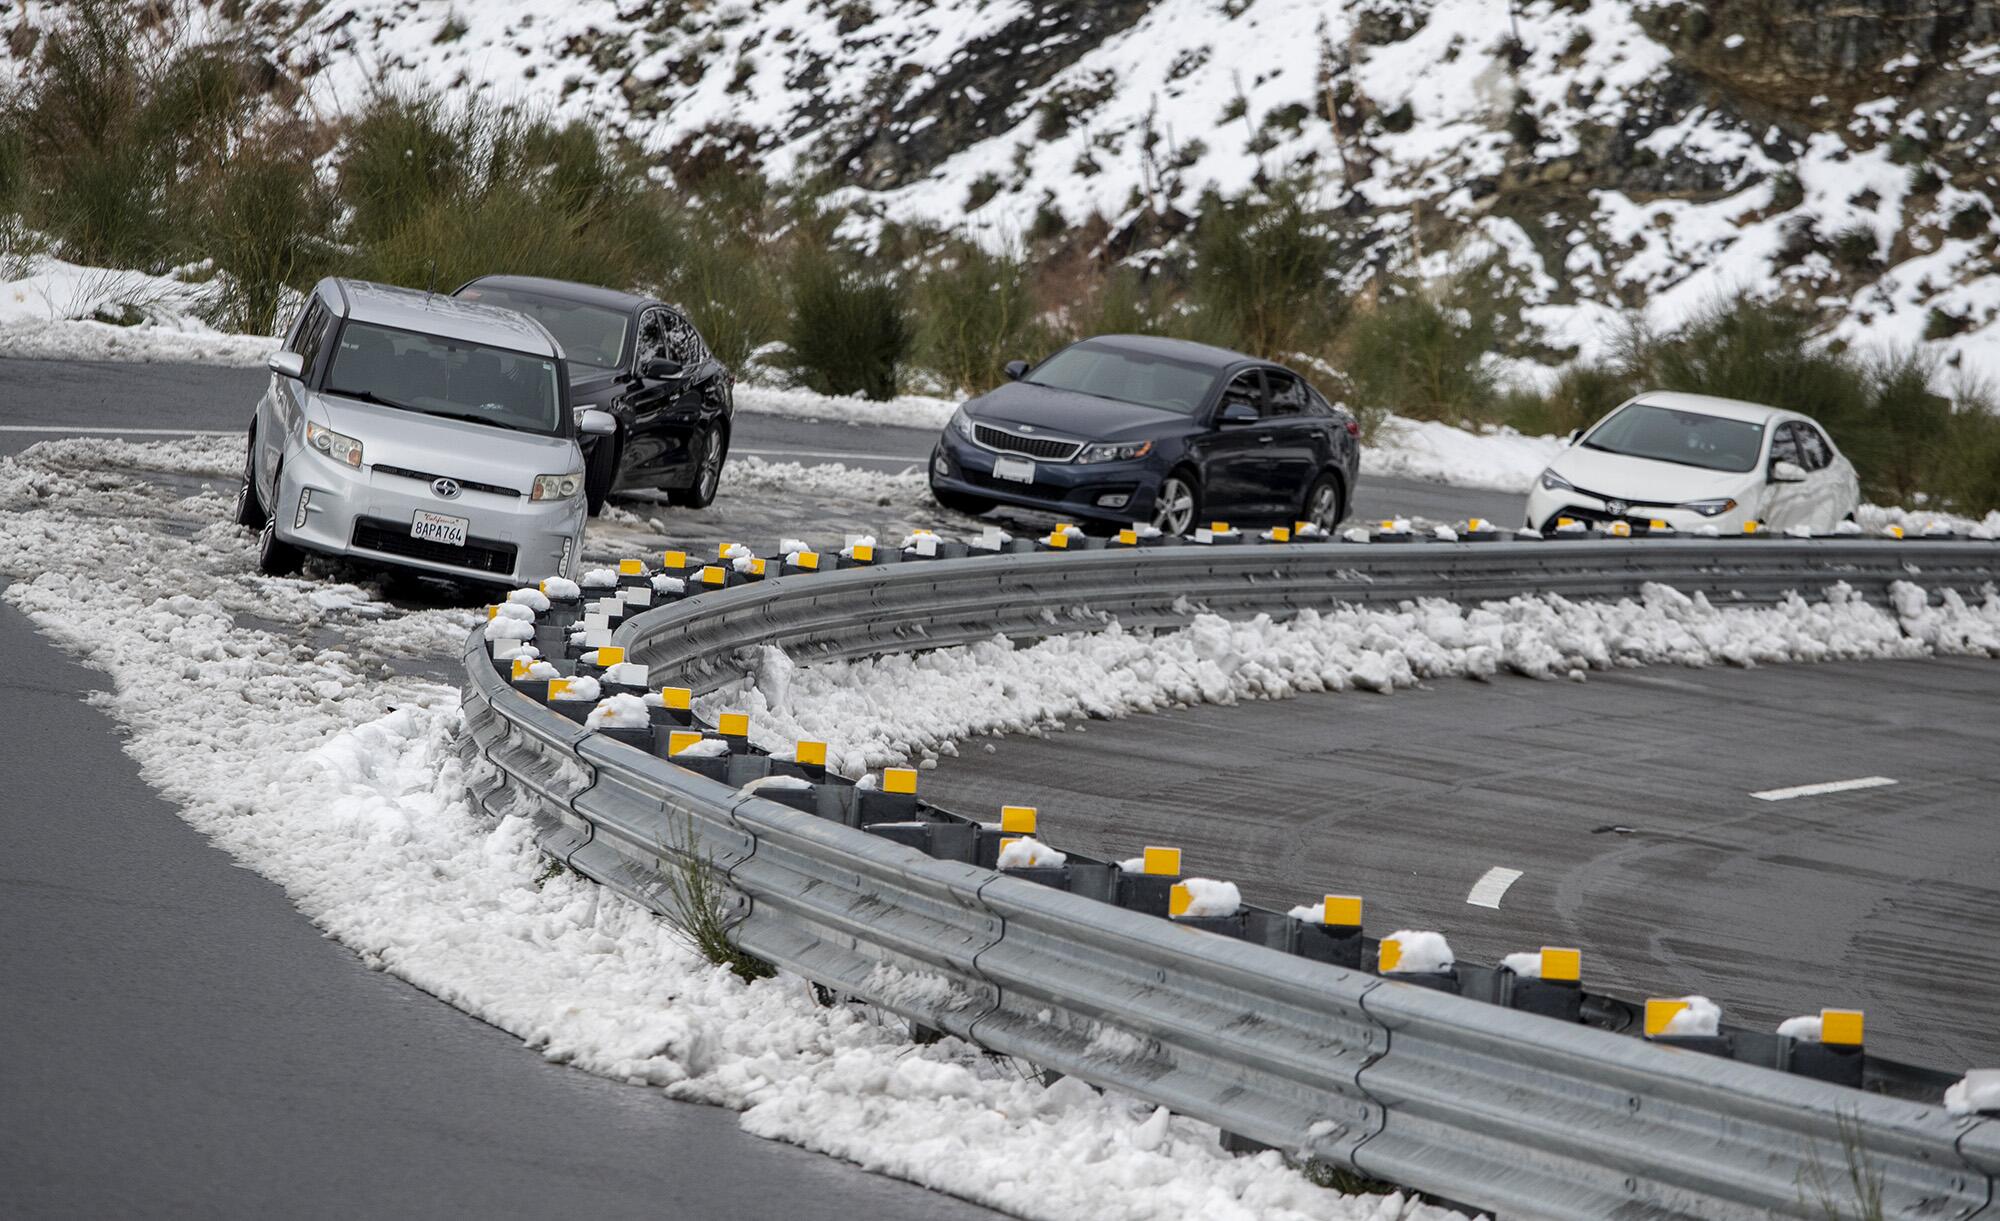 Vehicles that were abandoned, stuck or wrecked along the highway in Crestline, Calif., after a snowstorm.